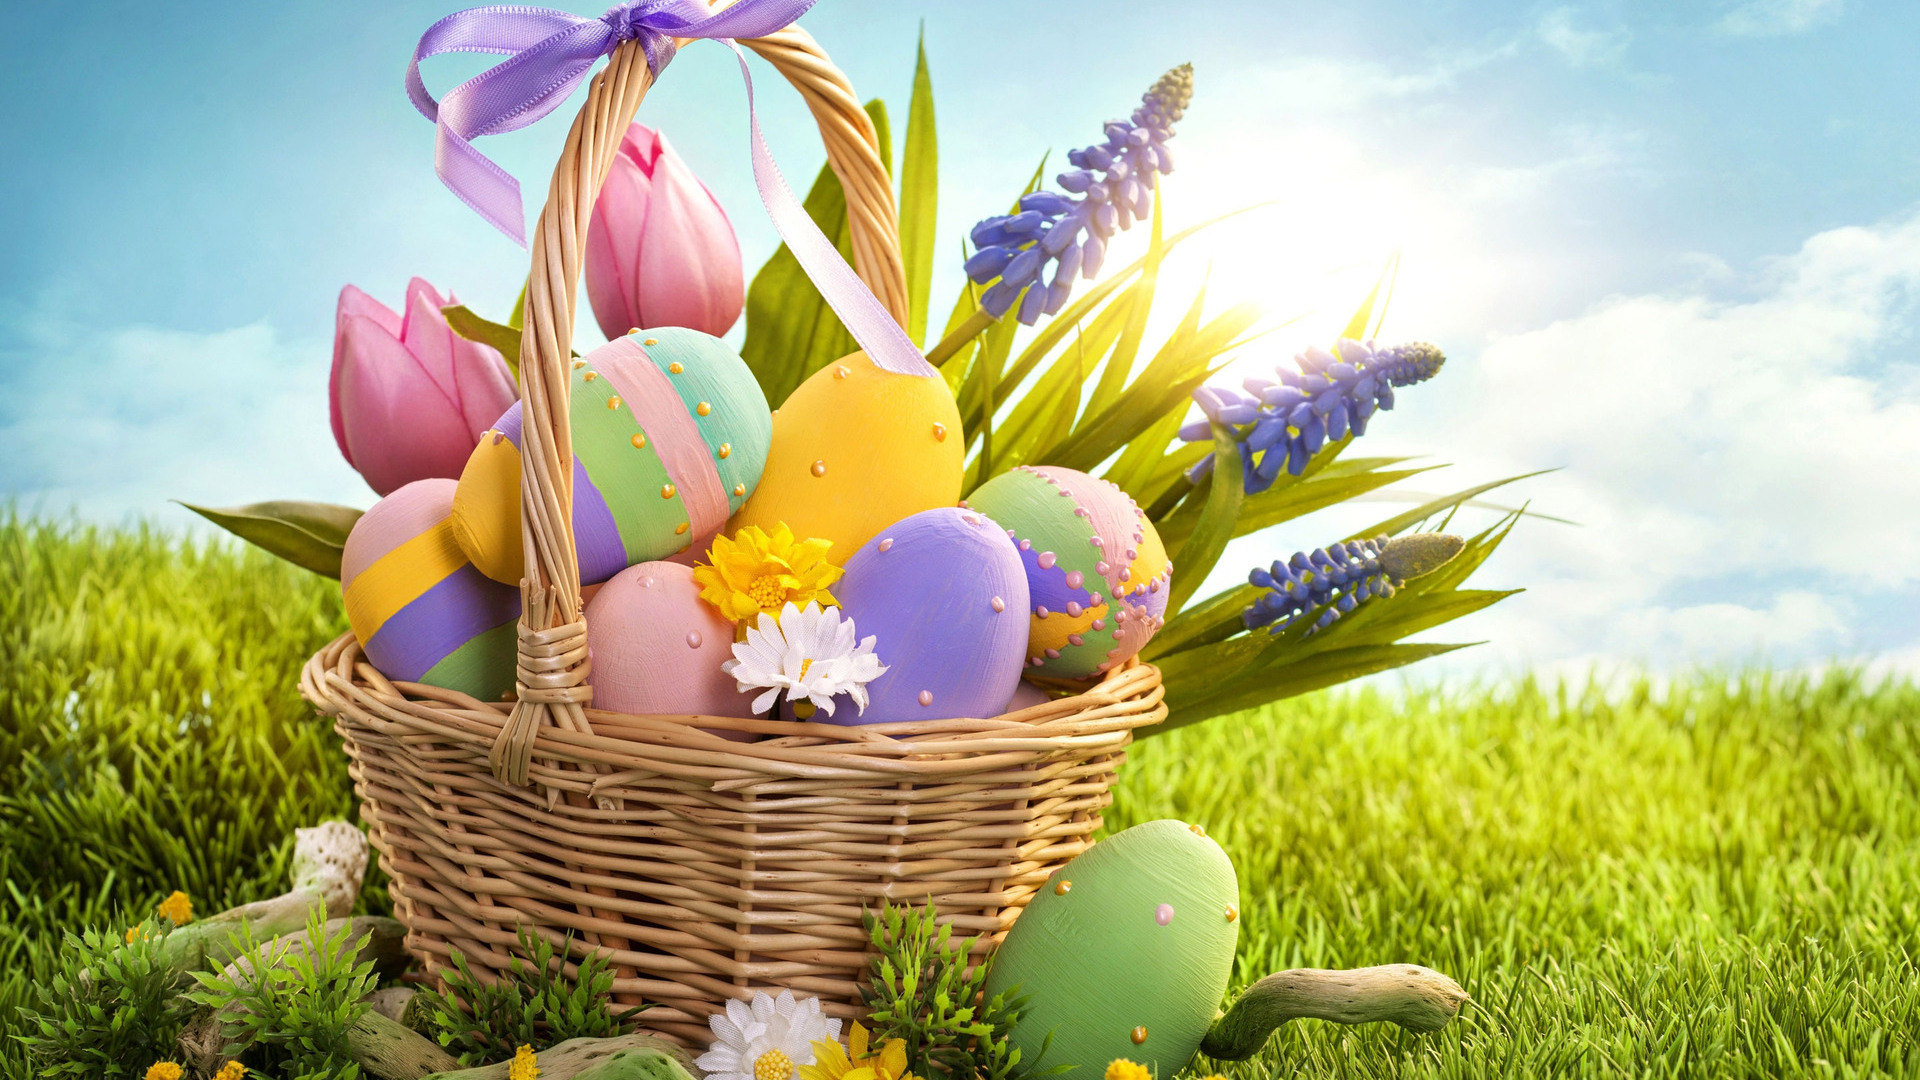 Free download easter wallpaper download which is under the easter wallpaper [1920x1200] for your Desktop, Mobile & Tablet. Explore Easter Wallpaper Free. Happy Easter Wallpaper, Free Spring Wallpaper, Happy